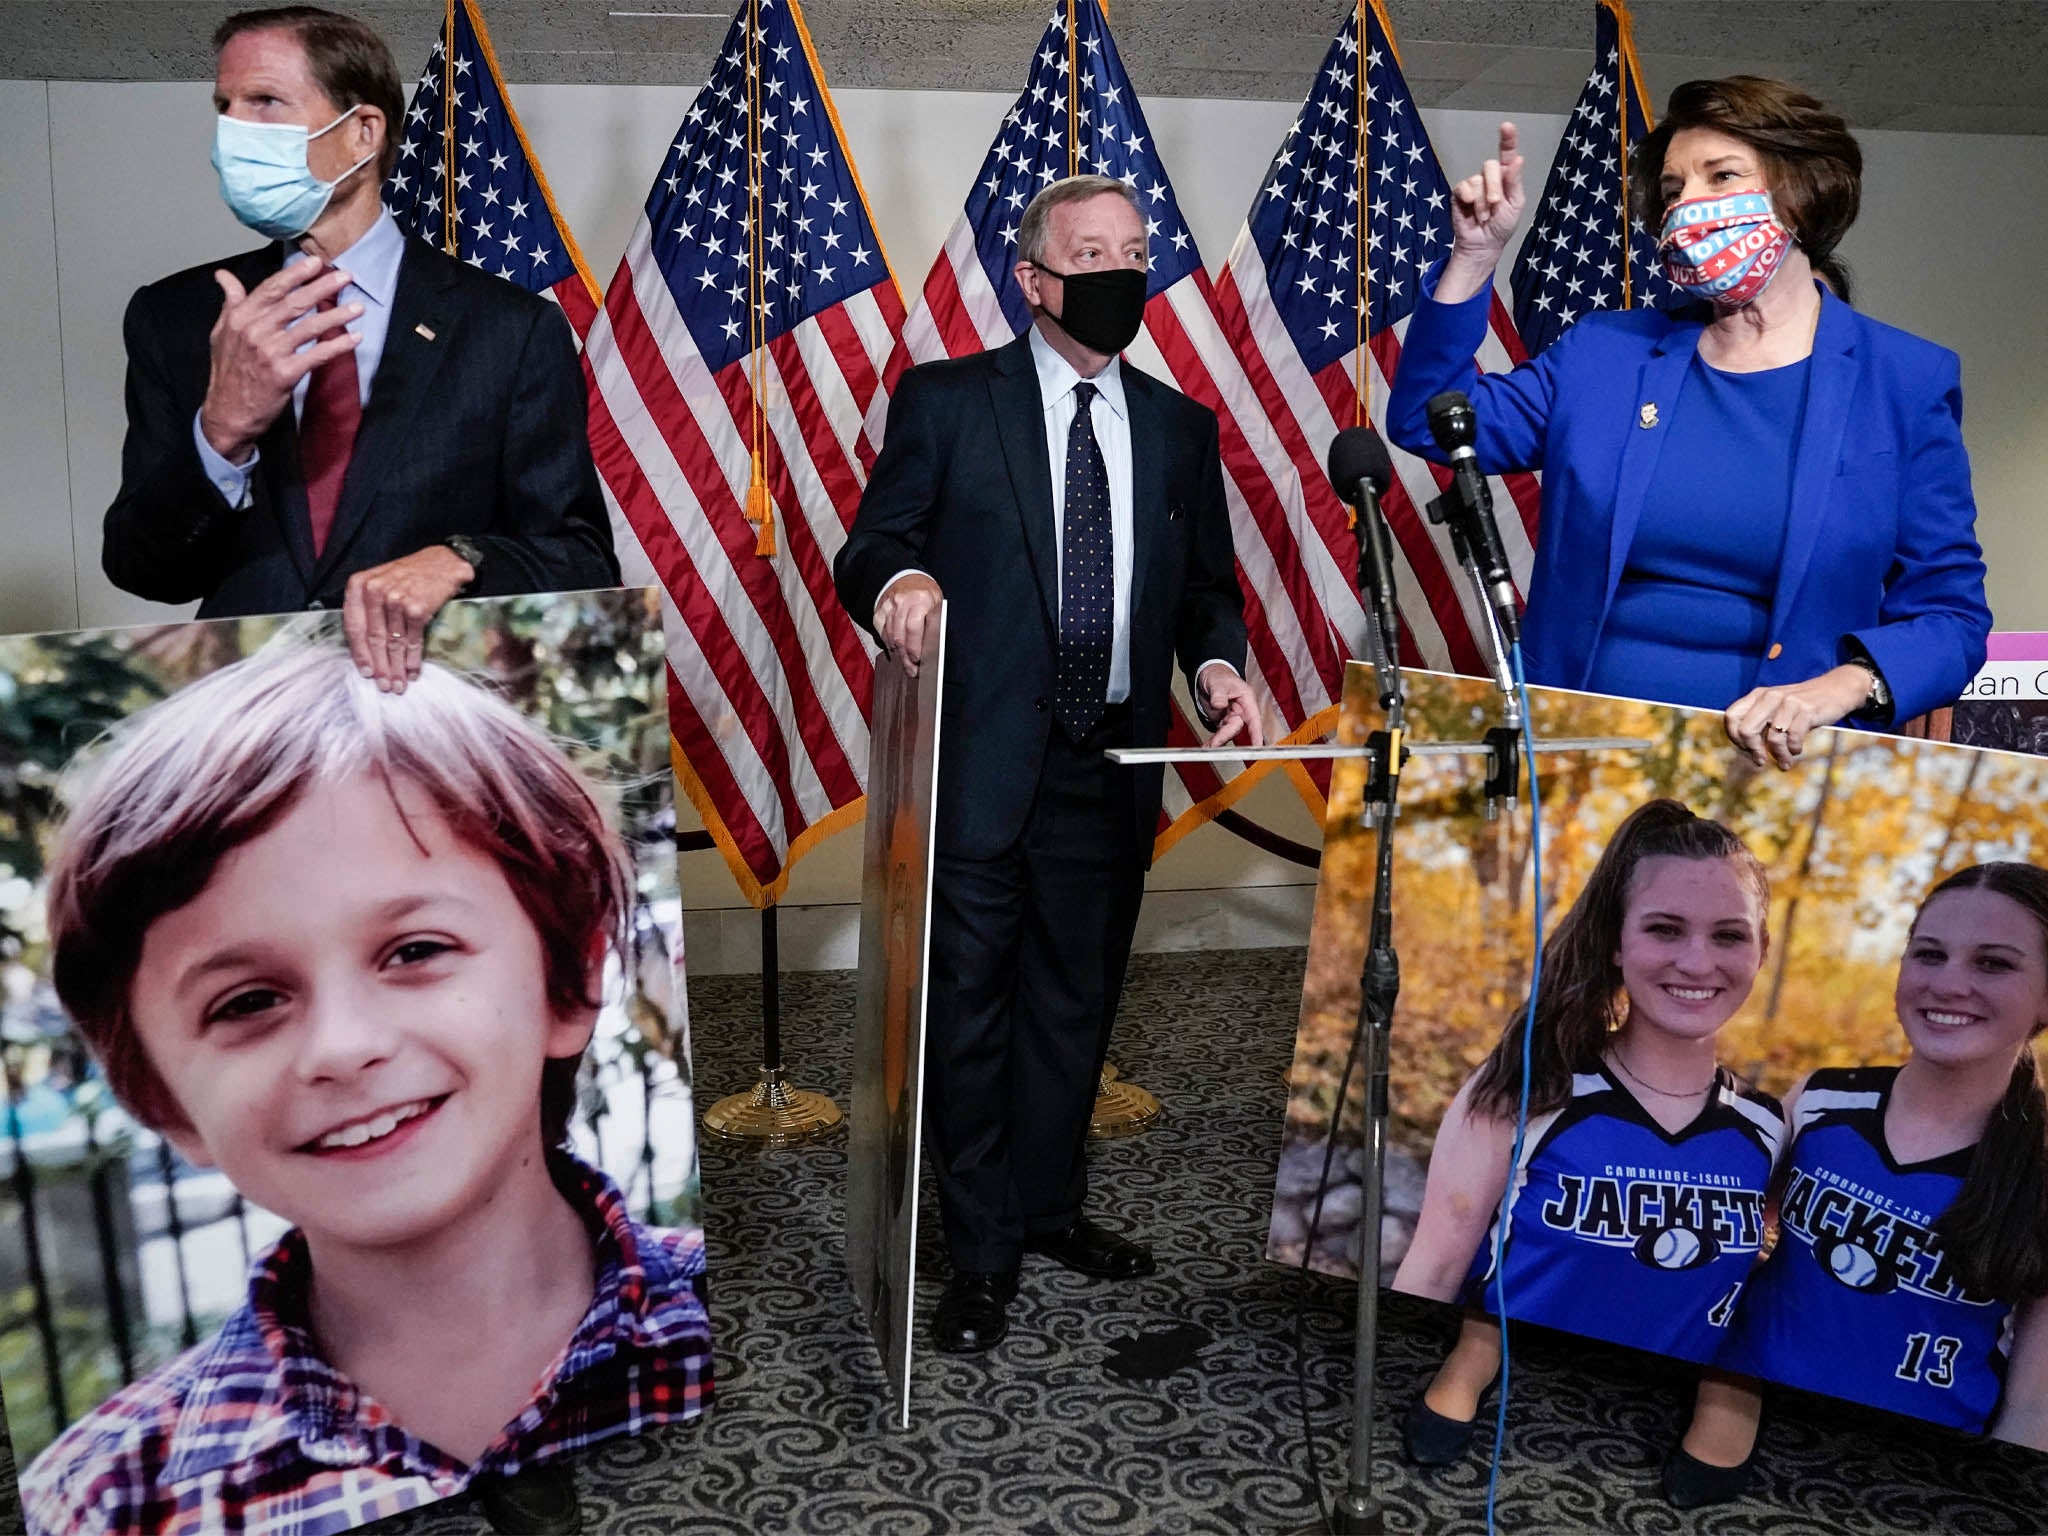 Democratic Senators Richard Blumenthal, Dick Durbin and Amy Klobuchar holding photographs of people who would be impacted by the elimination of the Affordable Health Care Act